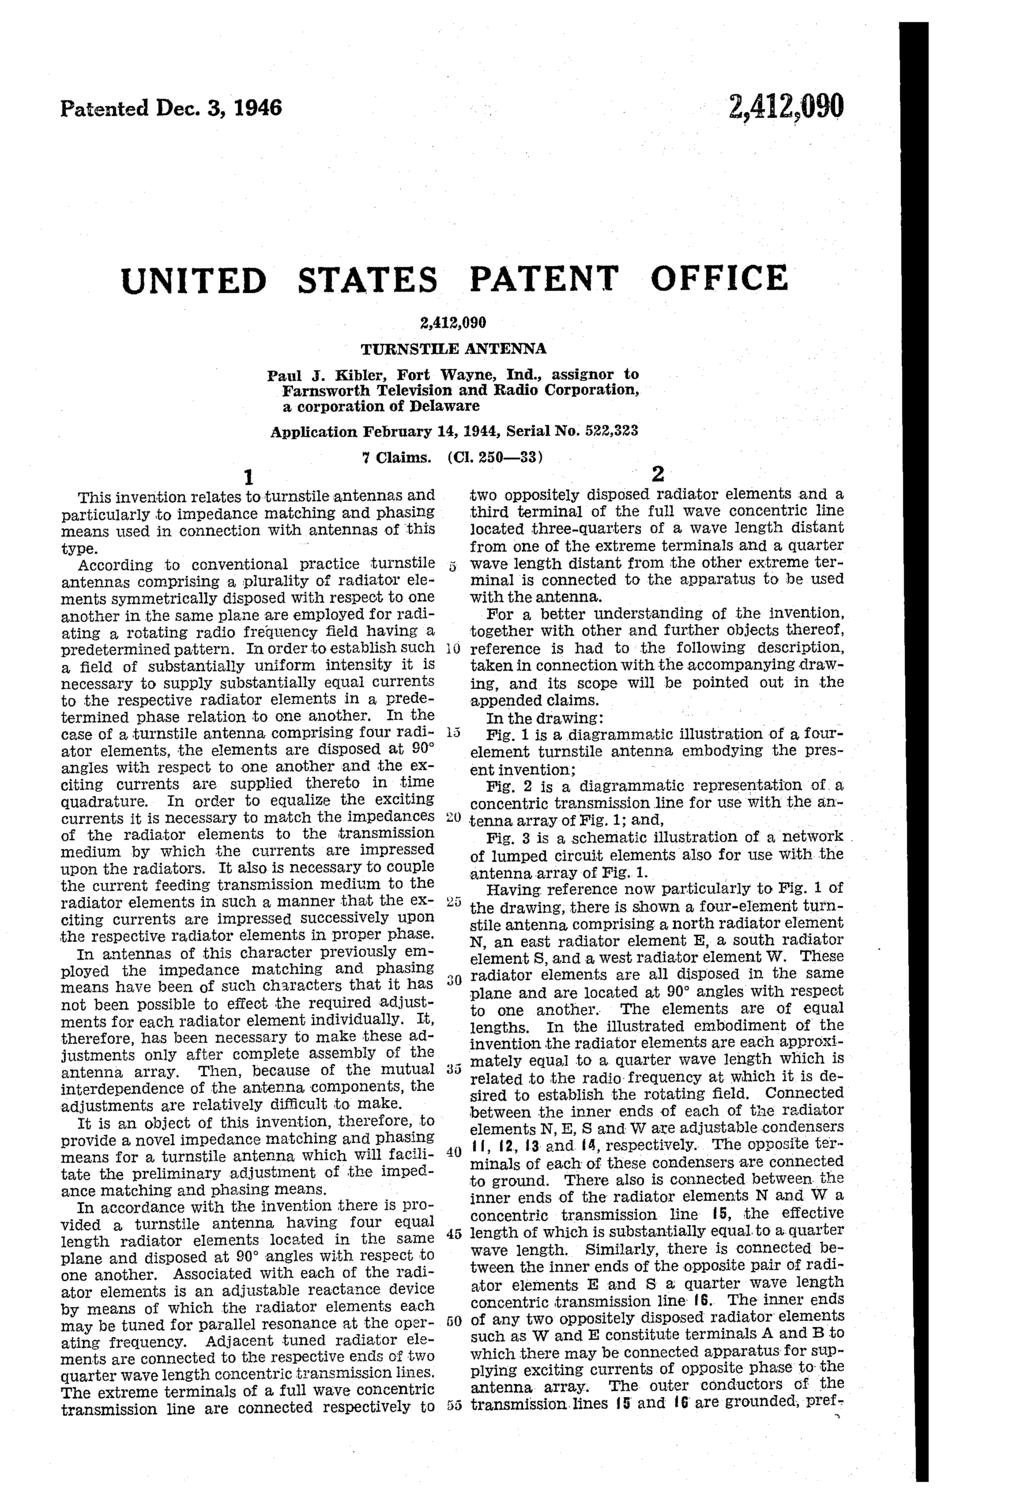 Patented Dec. 3, 1946 UNITED STATES PATENT OFFICE TURNSTLE ANTENNA This invention relates to turnstile antennas and particularly to impedance matching and phasing means used in connection.